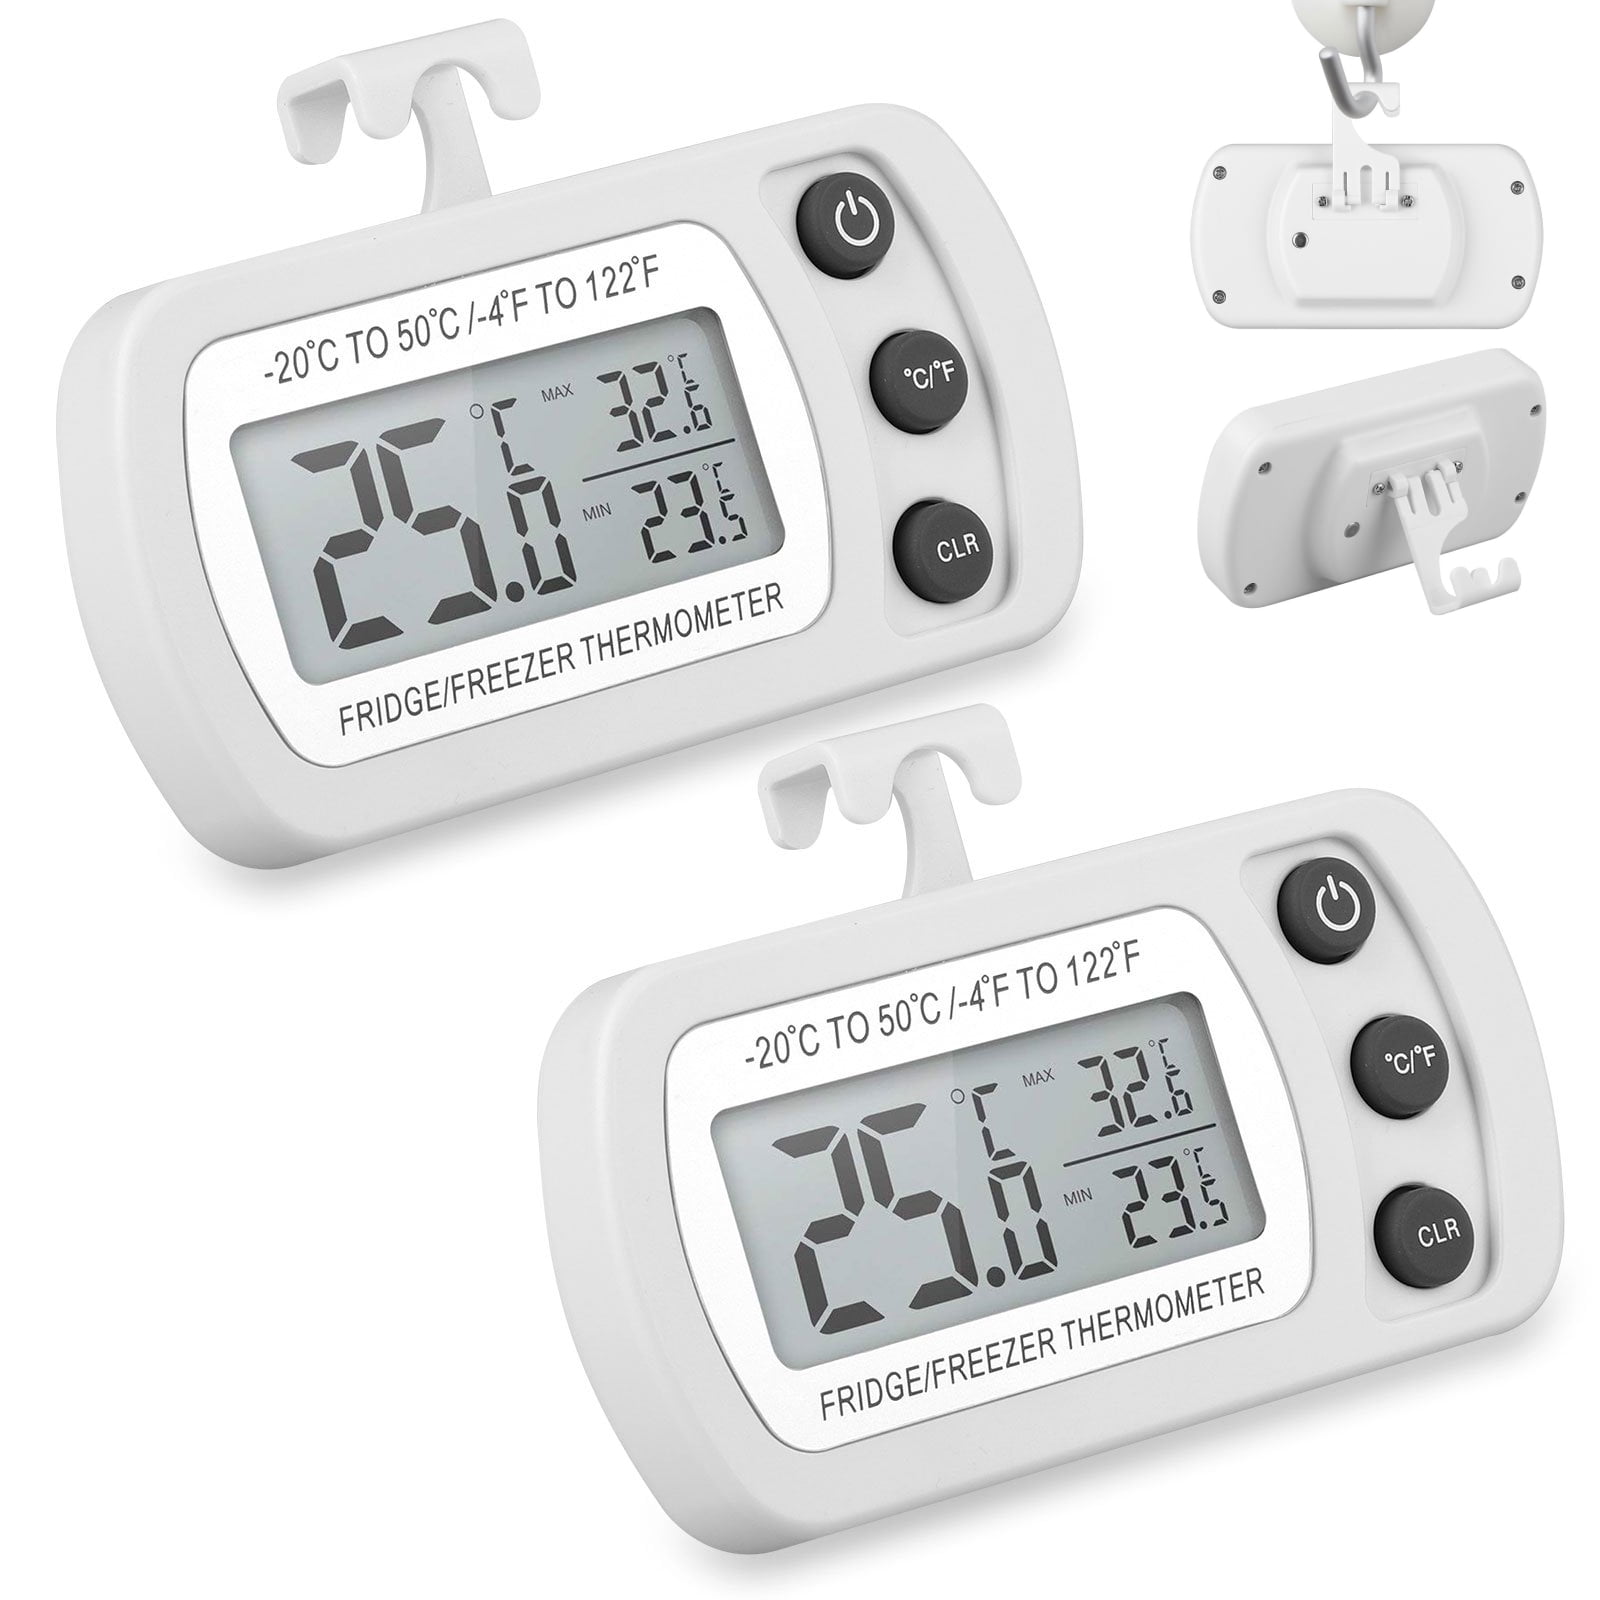 2 Pack Digital Refrigerator Freezer Thermometer,Max/Min Record Function  with Lar